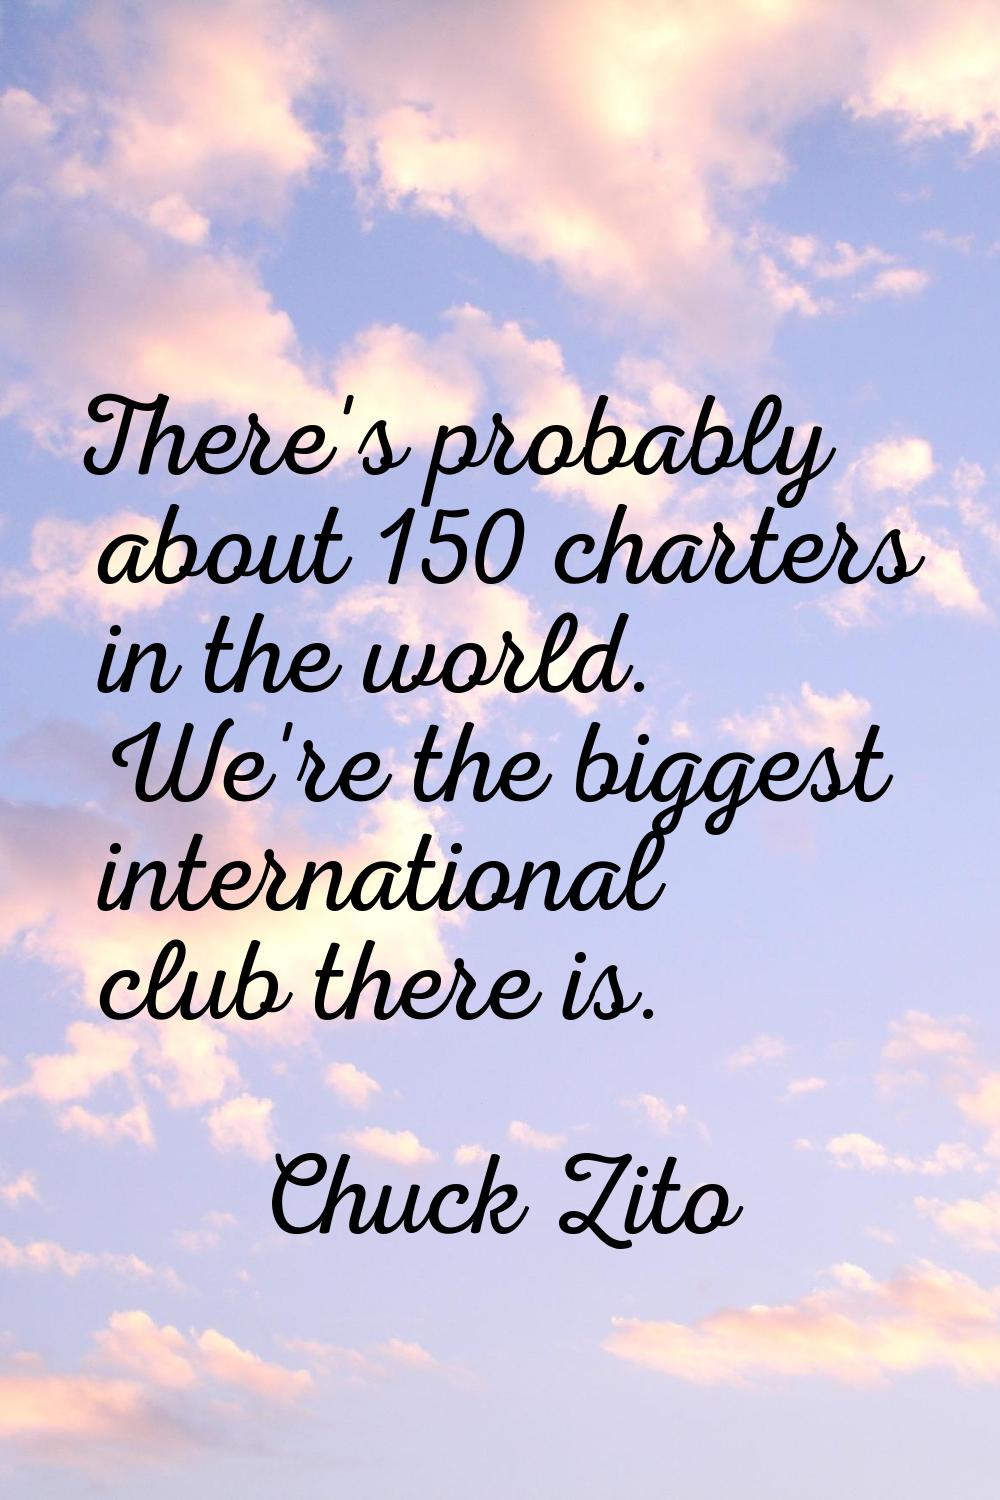 There's probably about 150 charters in the world. We're the biggest international club there is.